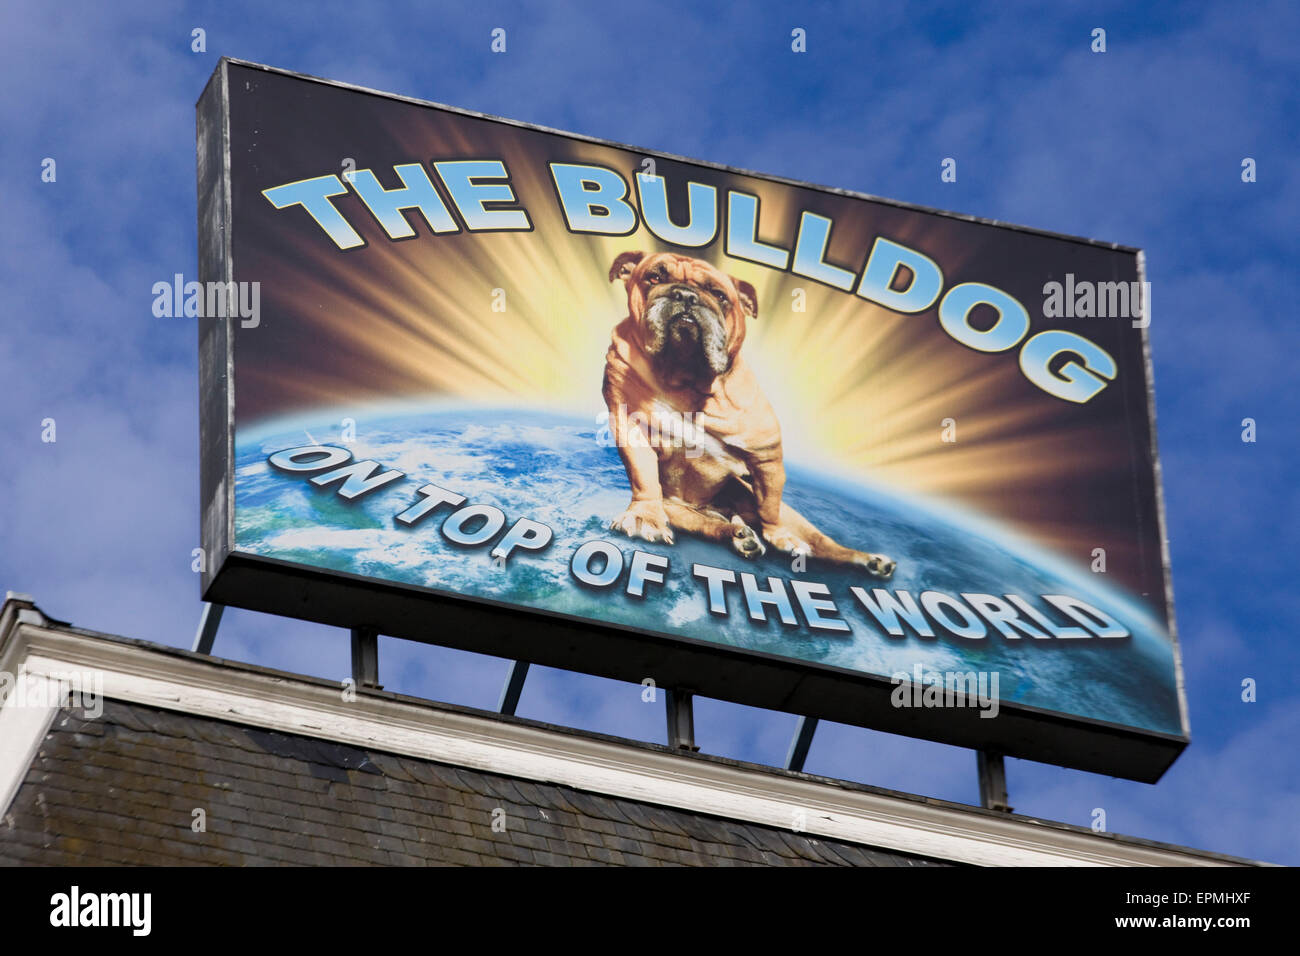 Bulldog Bar and coffee shop signs in Amsterdam Stock Photo